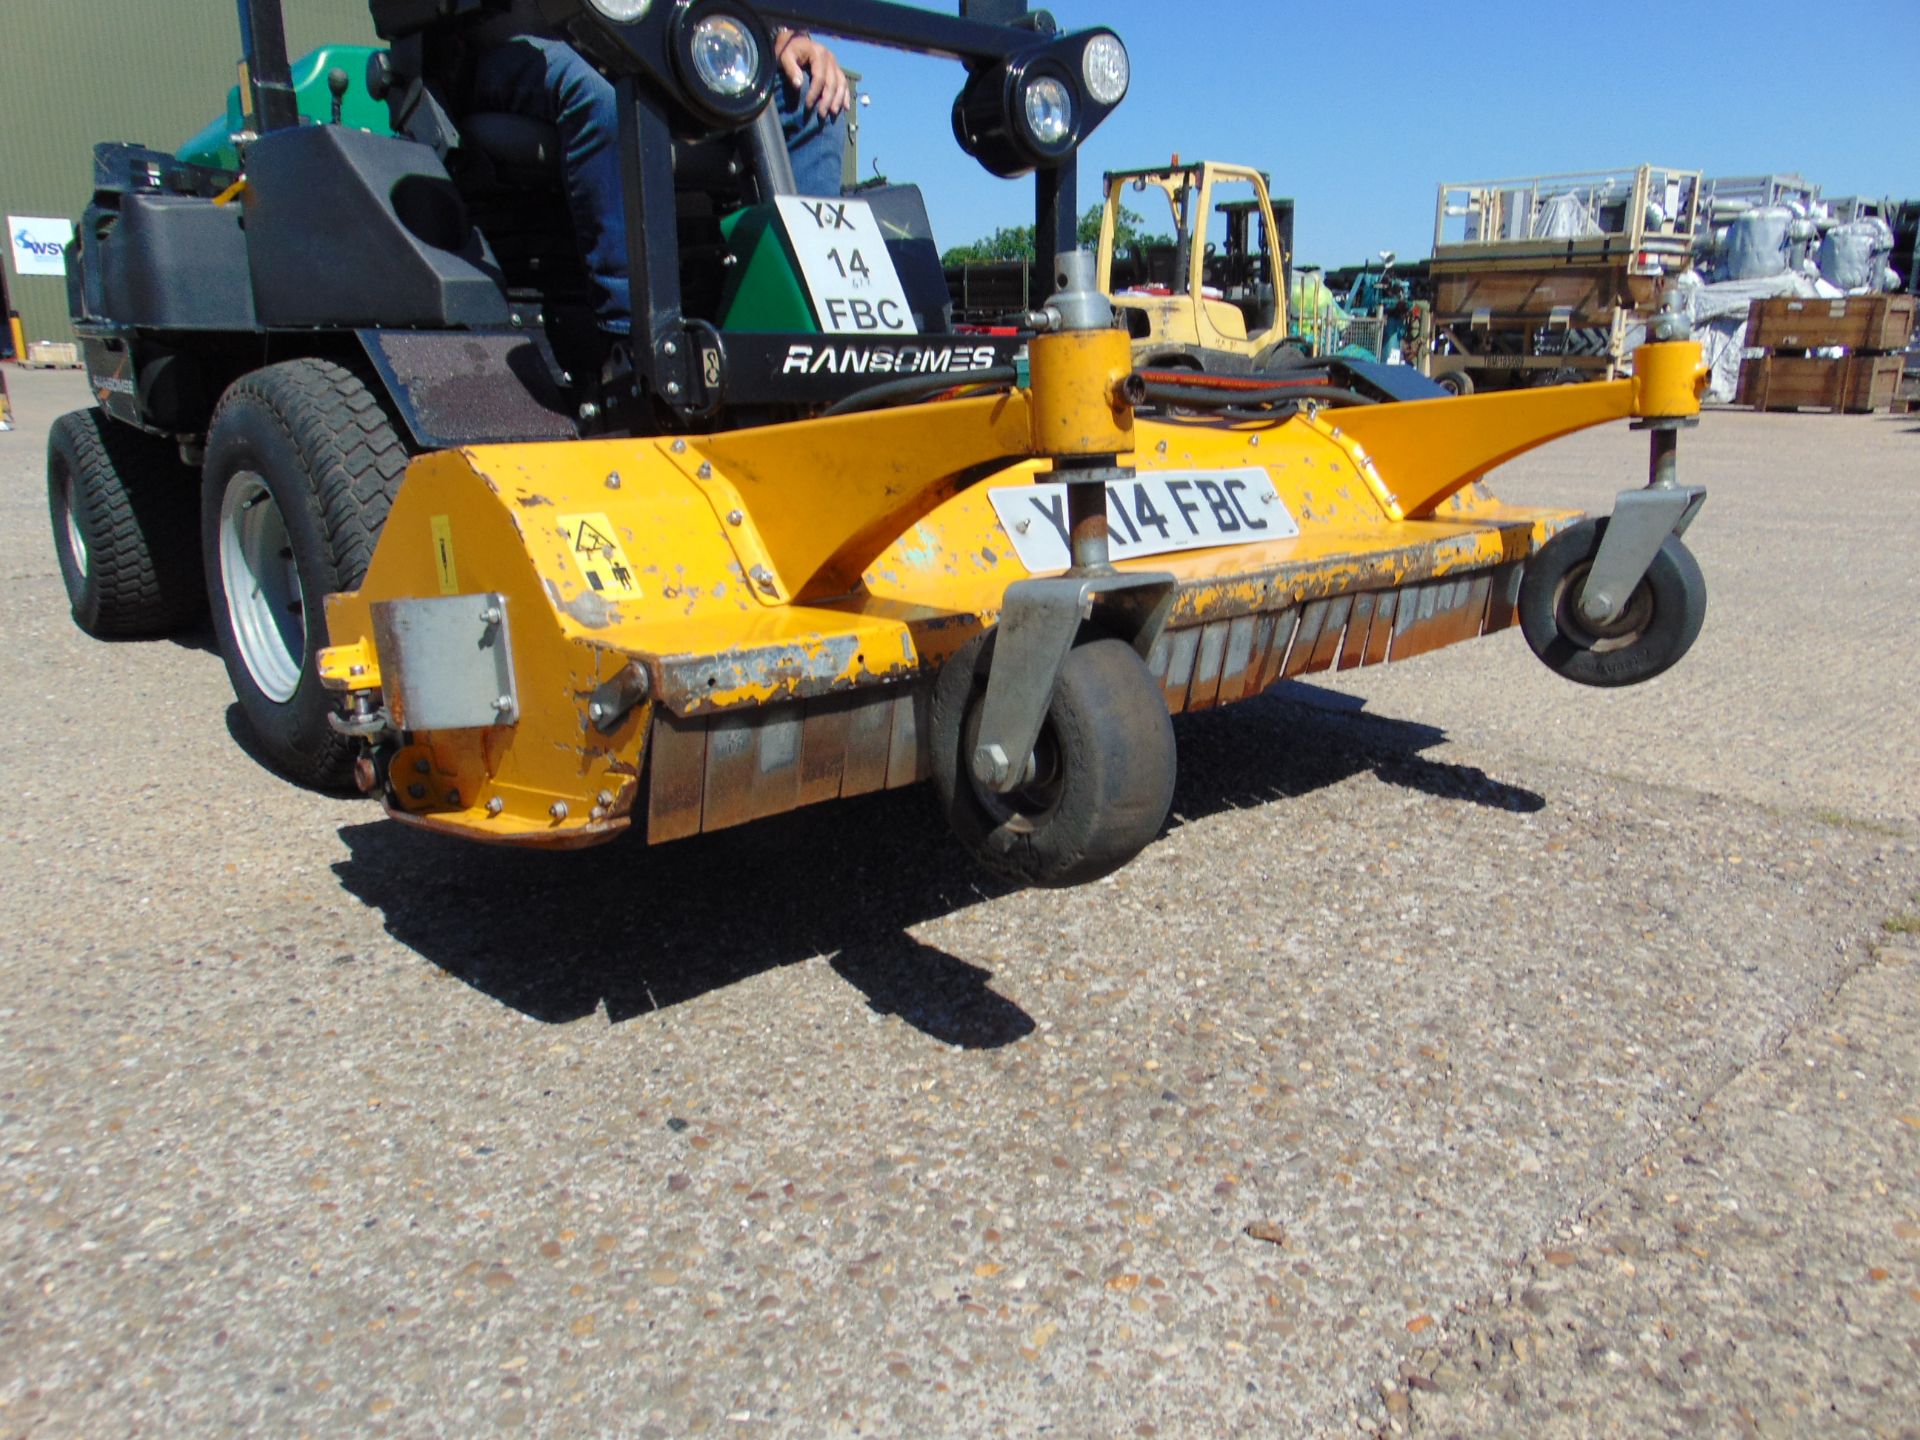 2014 Ransomes 4WD HR300 C/W Muthing Outfront Flail Mower ONLY 2,302 HOURS! - Image 10 of 29